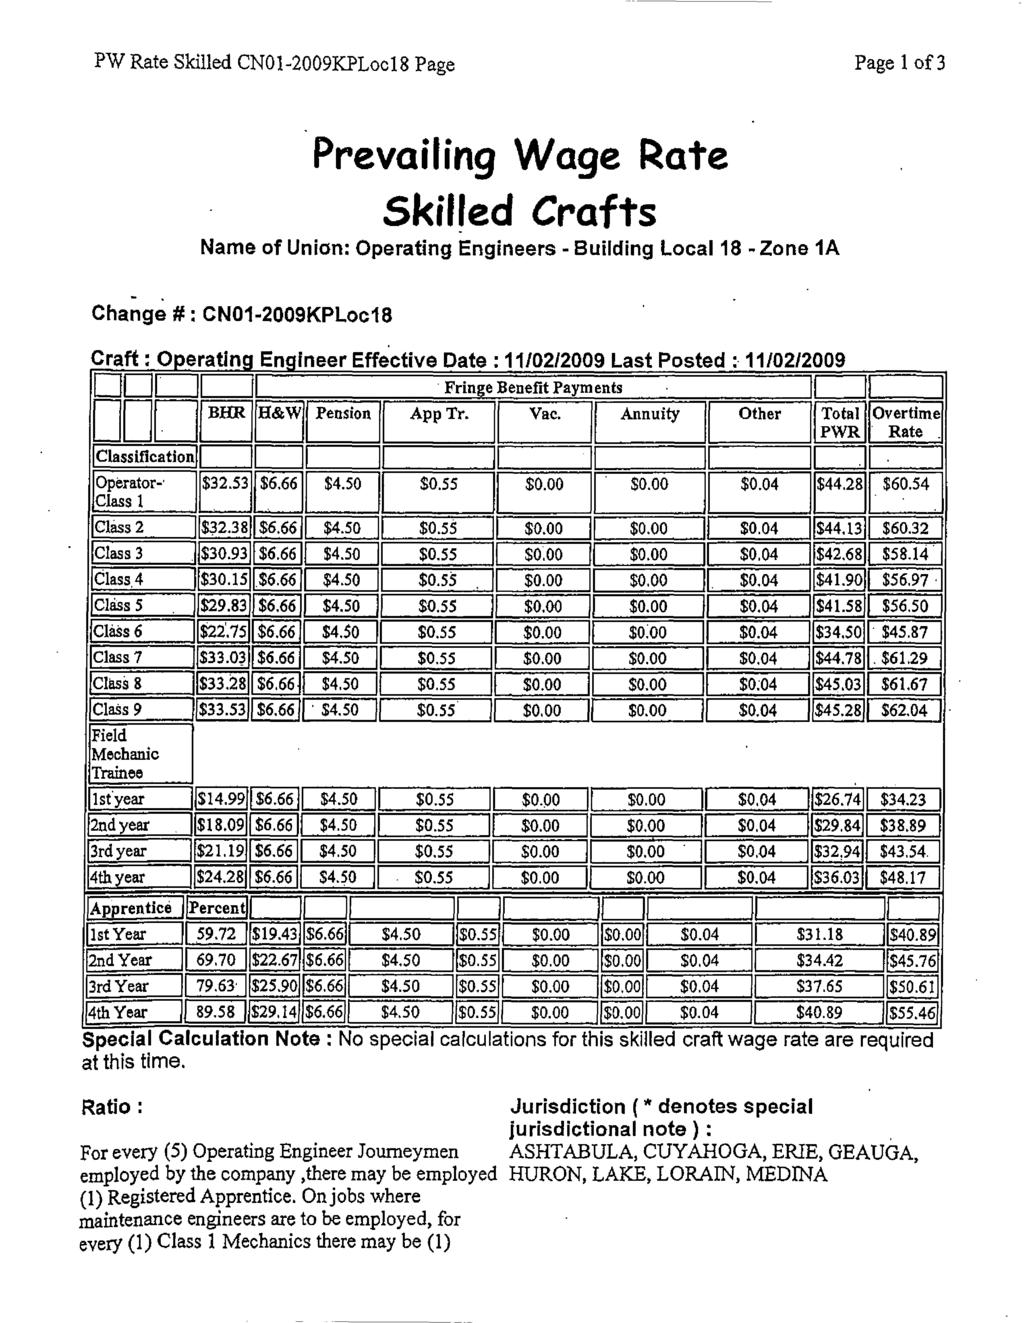 PW Rate Skilled CNO1-2009KPLoc1 8 Page Page 1 of 3 Prevailing Wage Rate Skilled Crafts Name of Union: Operating Engineers - Building Local 18 Zone 1A Change # CNO1-2009KPLoc18 Craft : Operating En